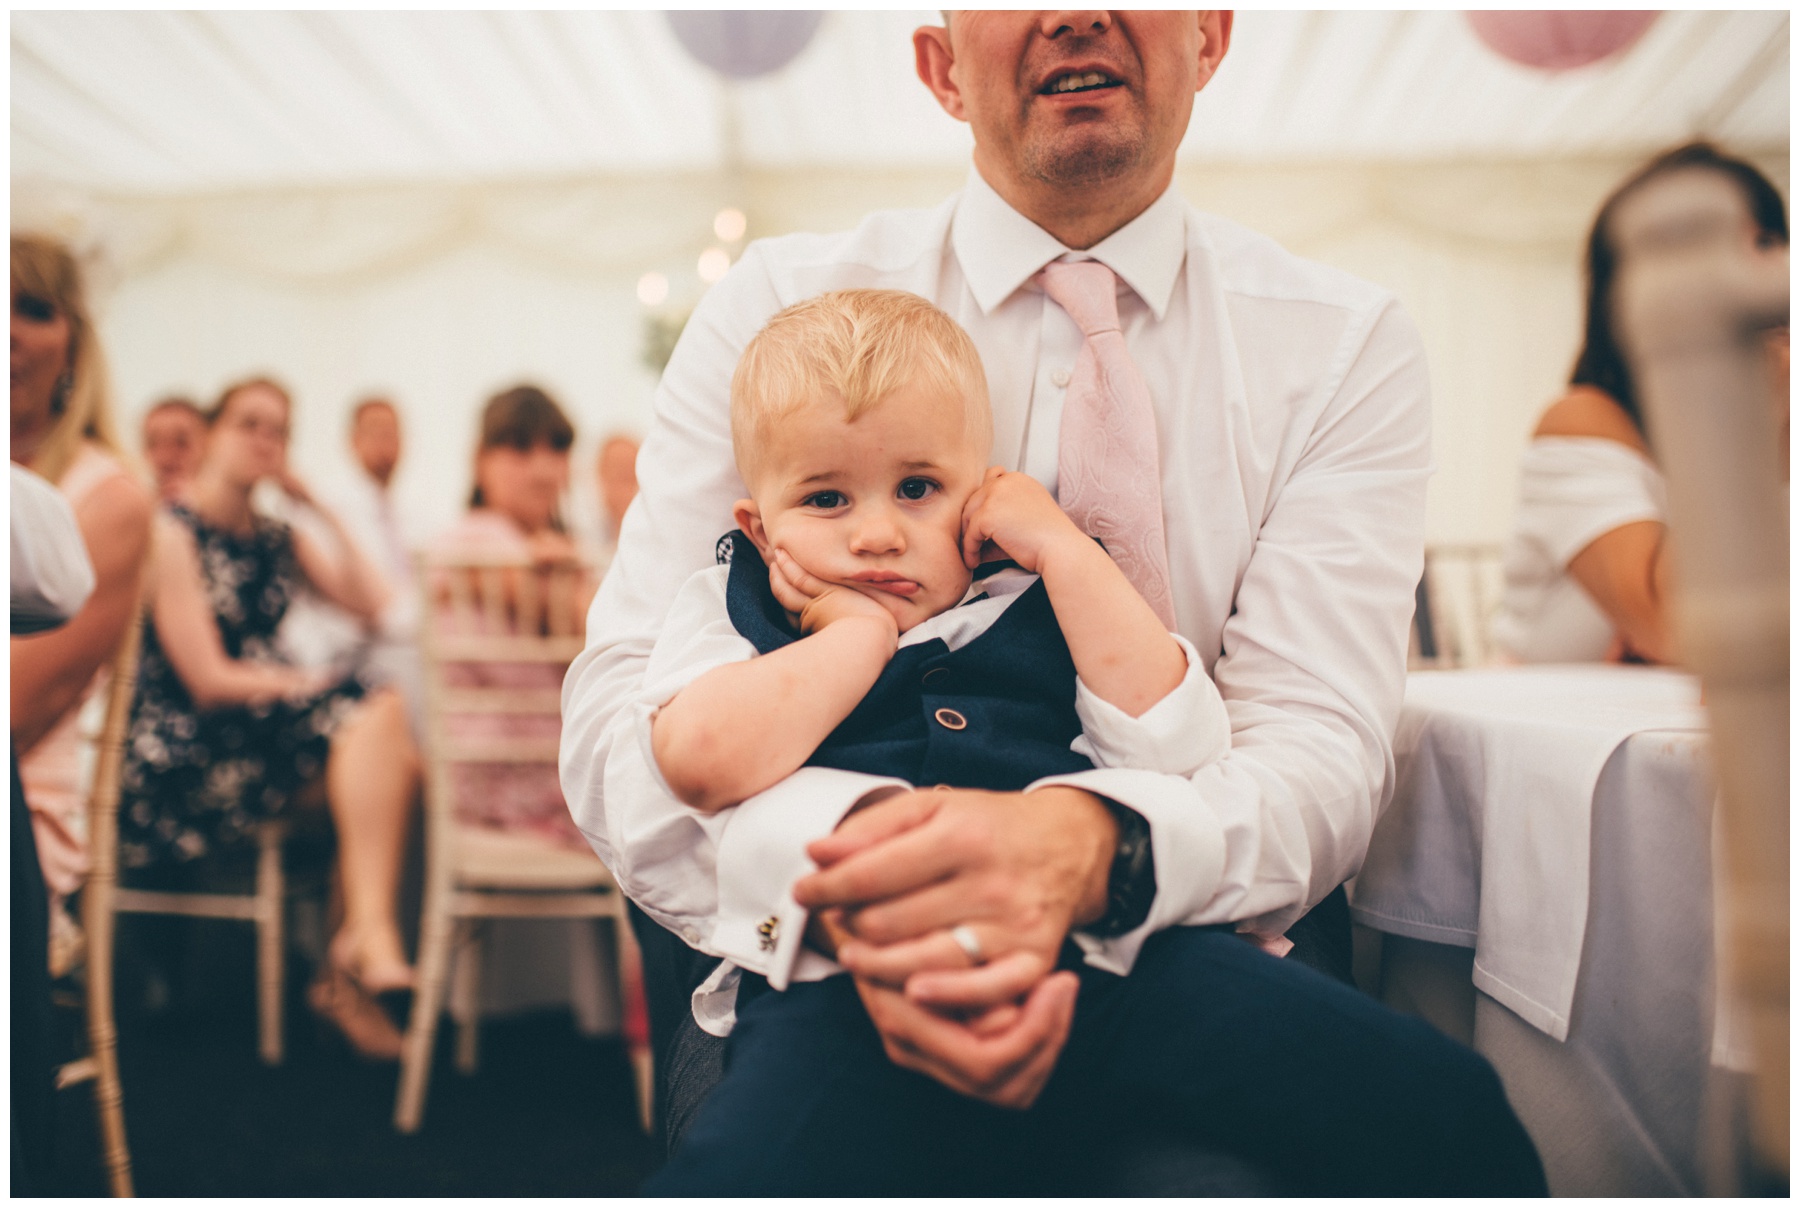 Adorable little wedding venue looks incredibly bored during the wedding speeches at Nunsmere Hall.